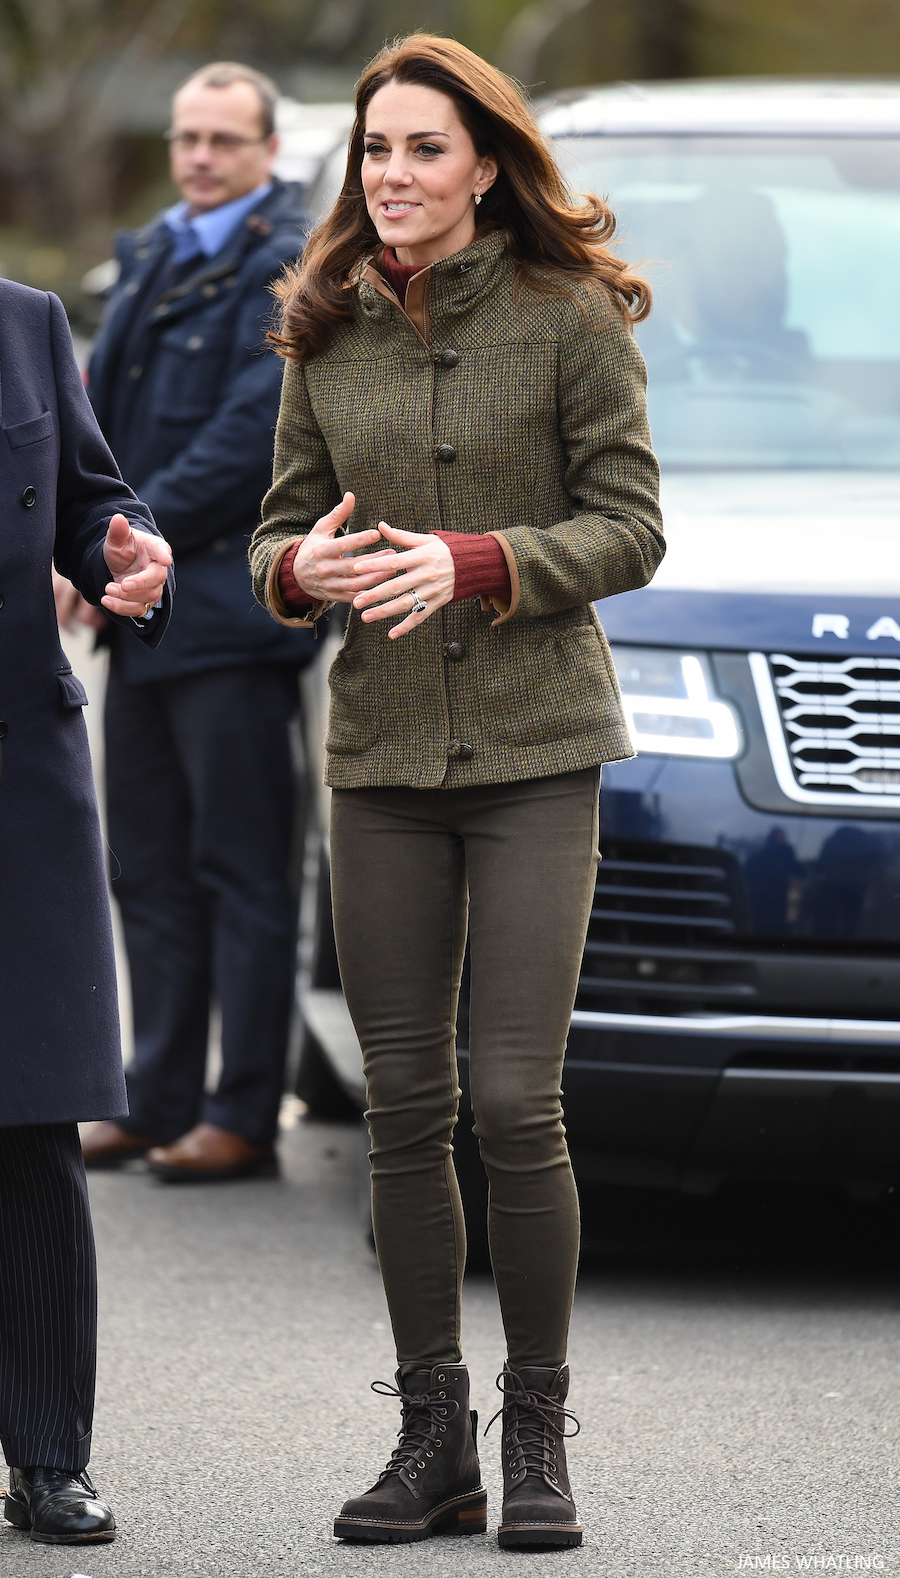 Kate Middleton wearing the Dubarry tweed jacket in the colour 'heath.'  The Princess is also wearing a dark red coloured roll neck sweater, khaki green skinny jeans and brown boots. 